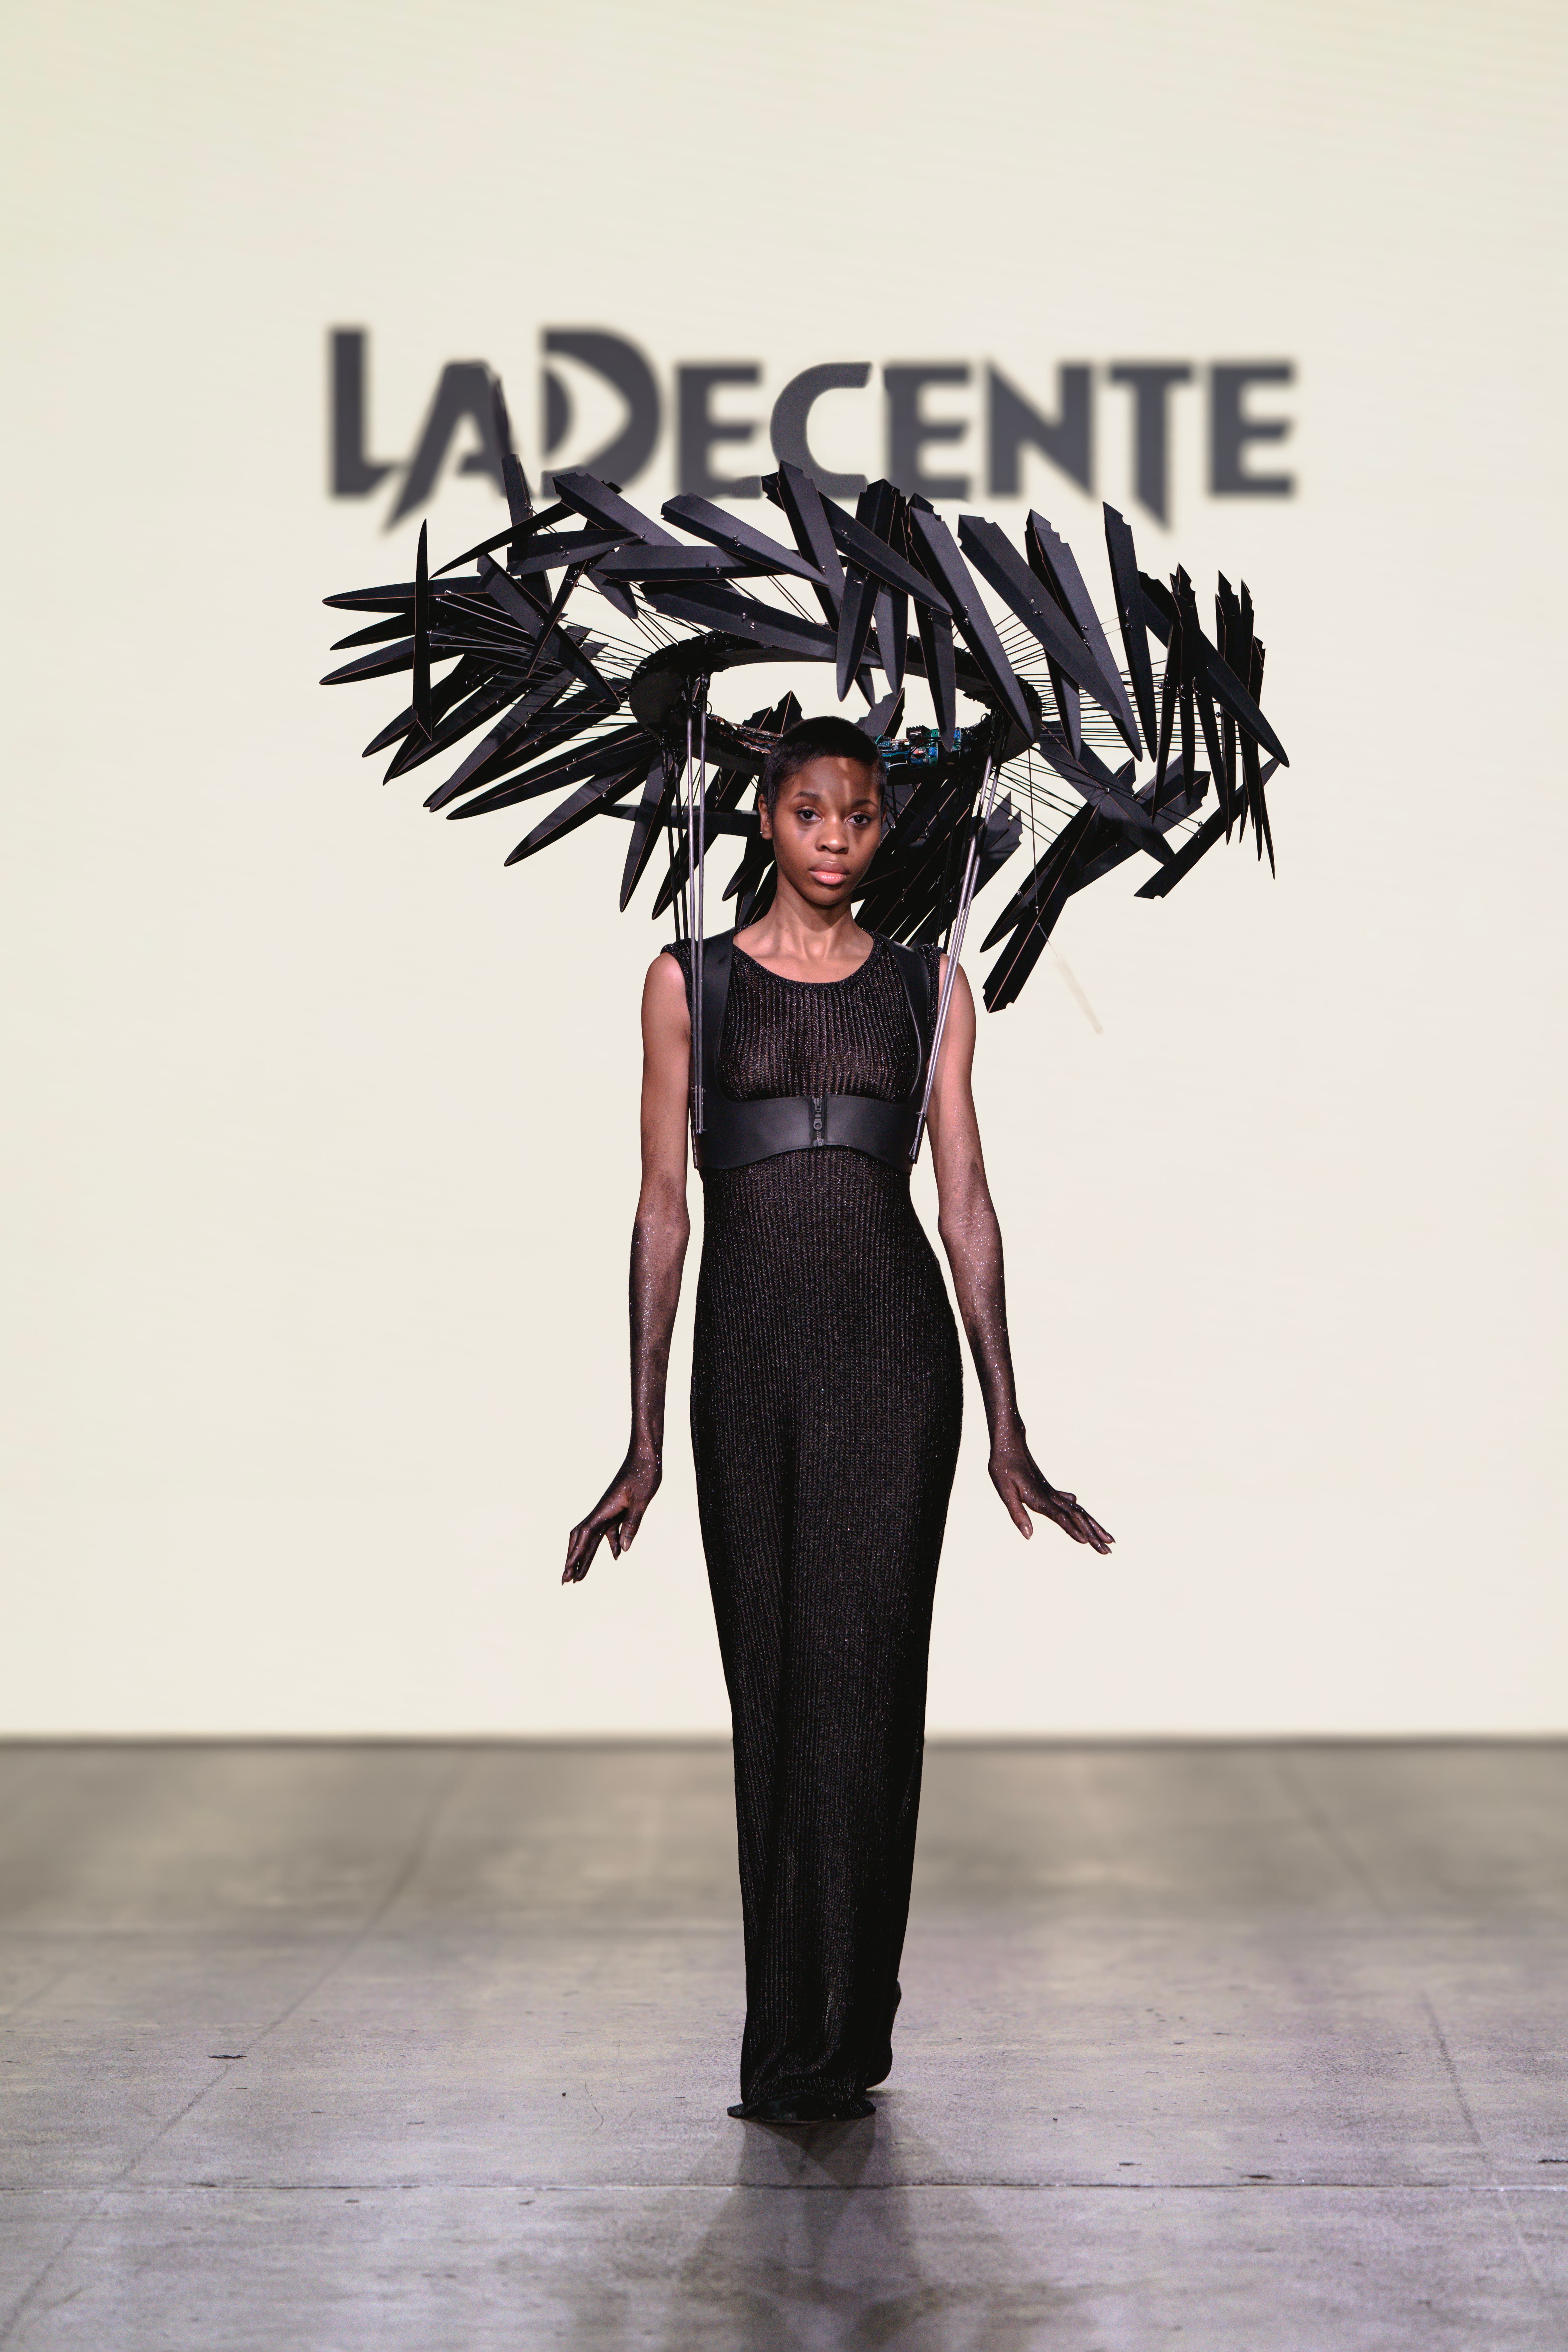 Ladecente balances sustainability and artistic innovation. Photo: Ladecente